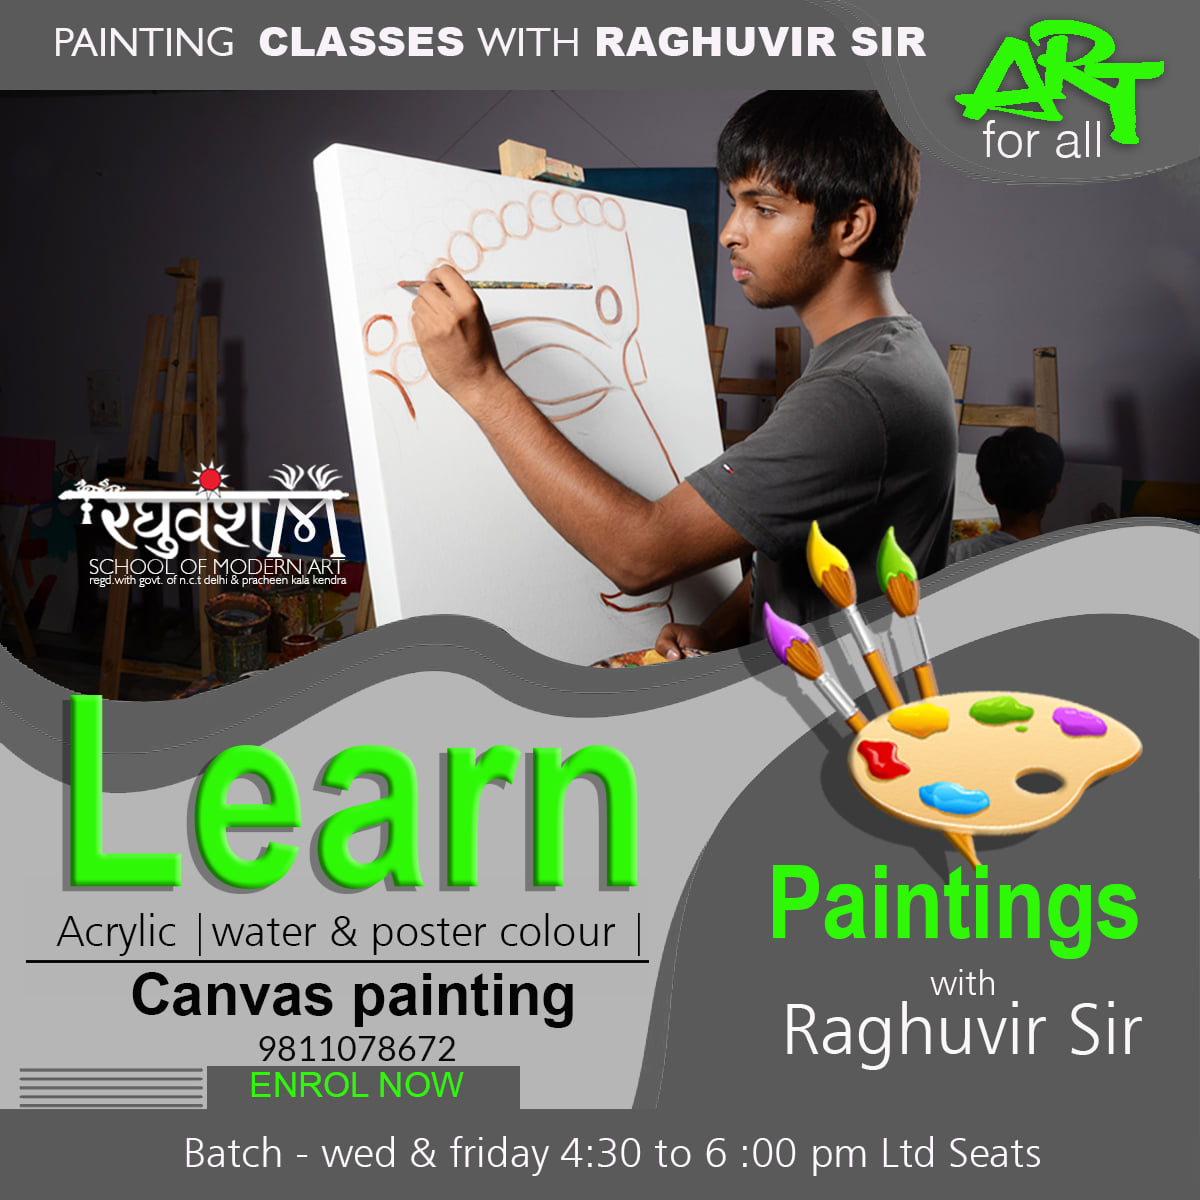 Painting Classes with Raghuvir SirEducation and LearningHobby ClassesWest DelhiPunjabi Bagh